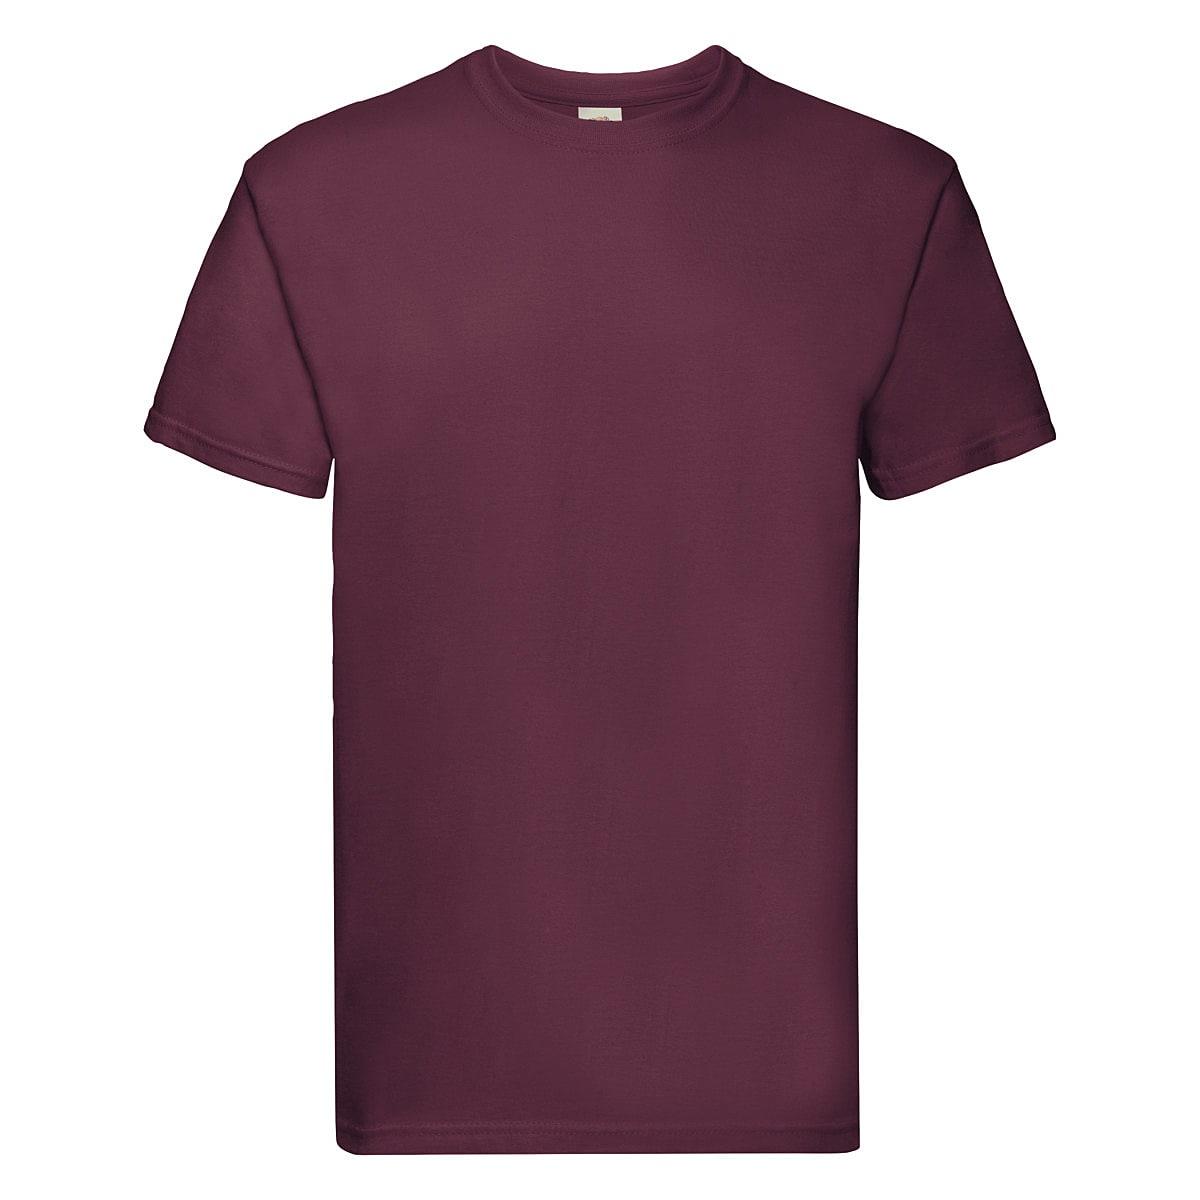 Fruit Of The Loom Super Premium T-Shirt in Burgundy (Product Code: 61044)